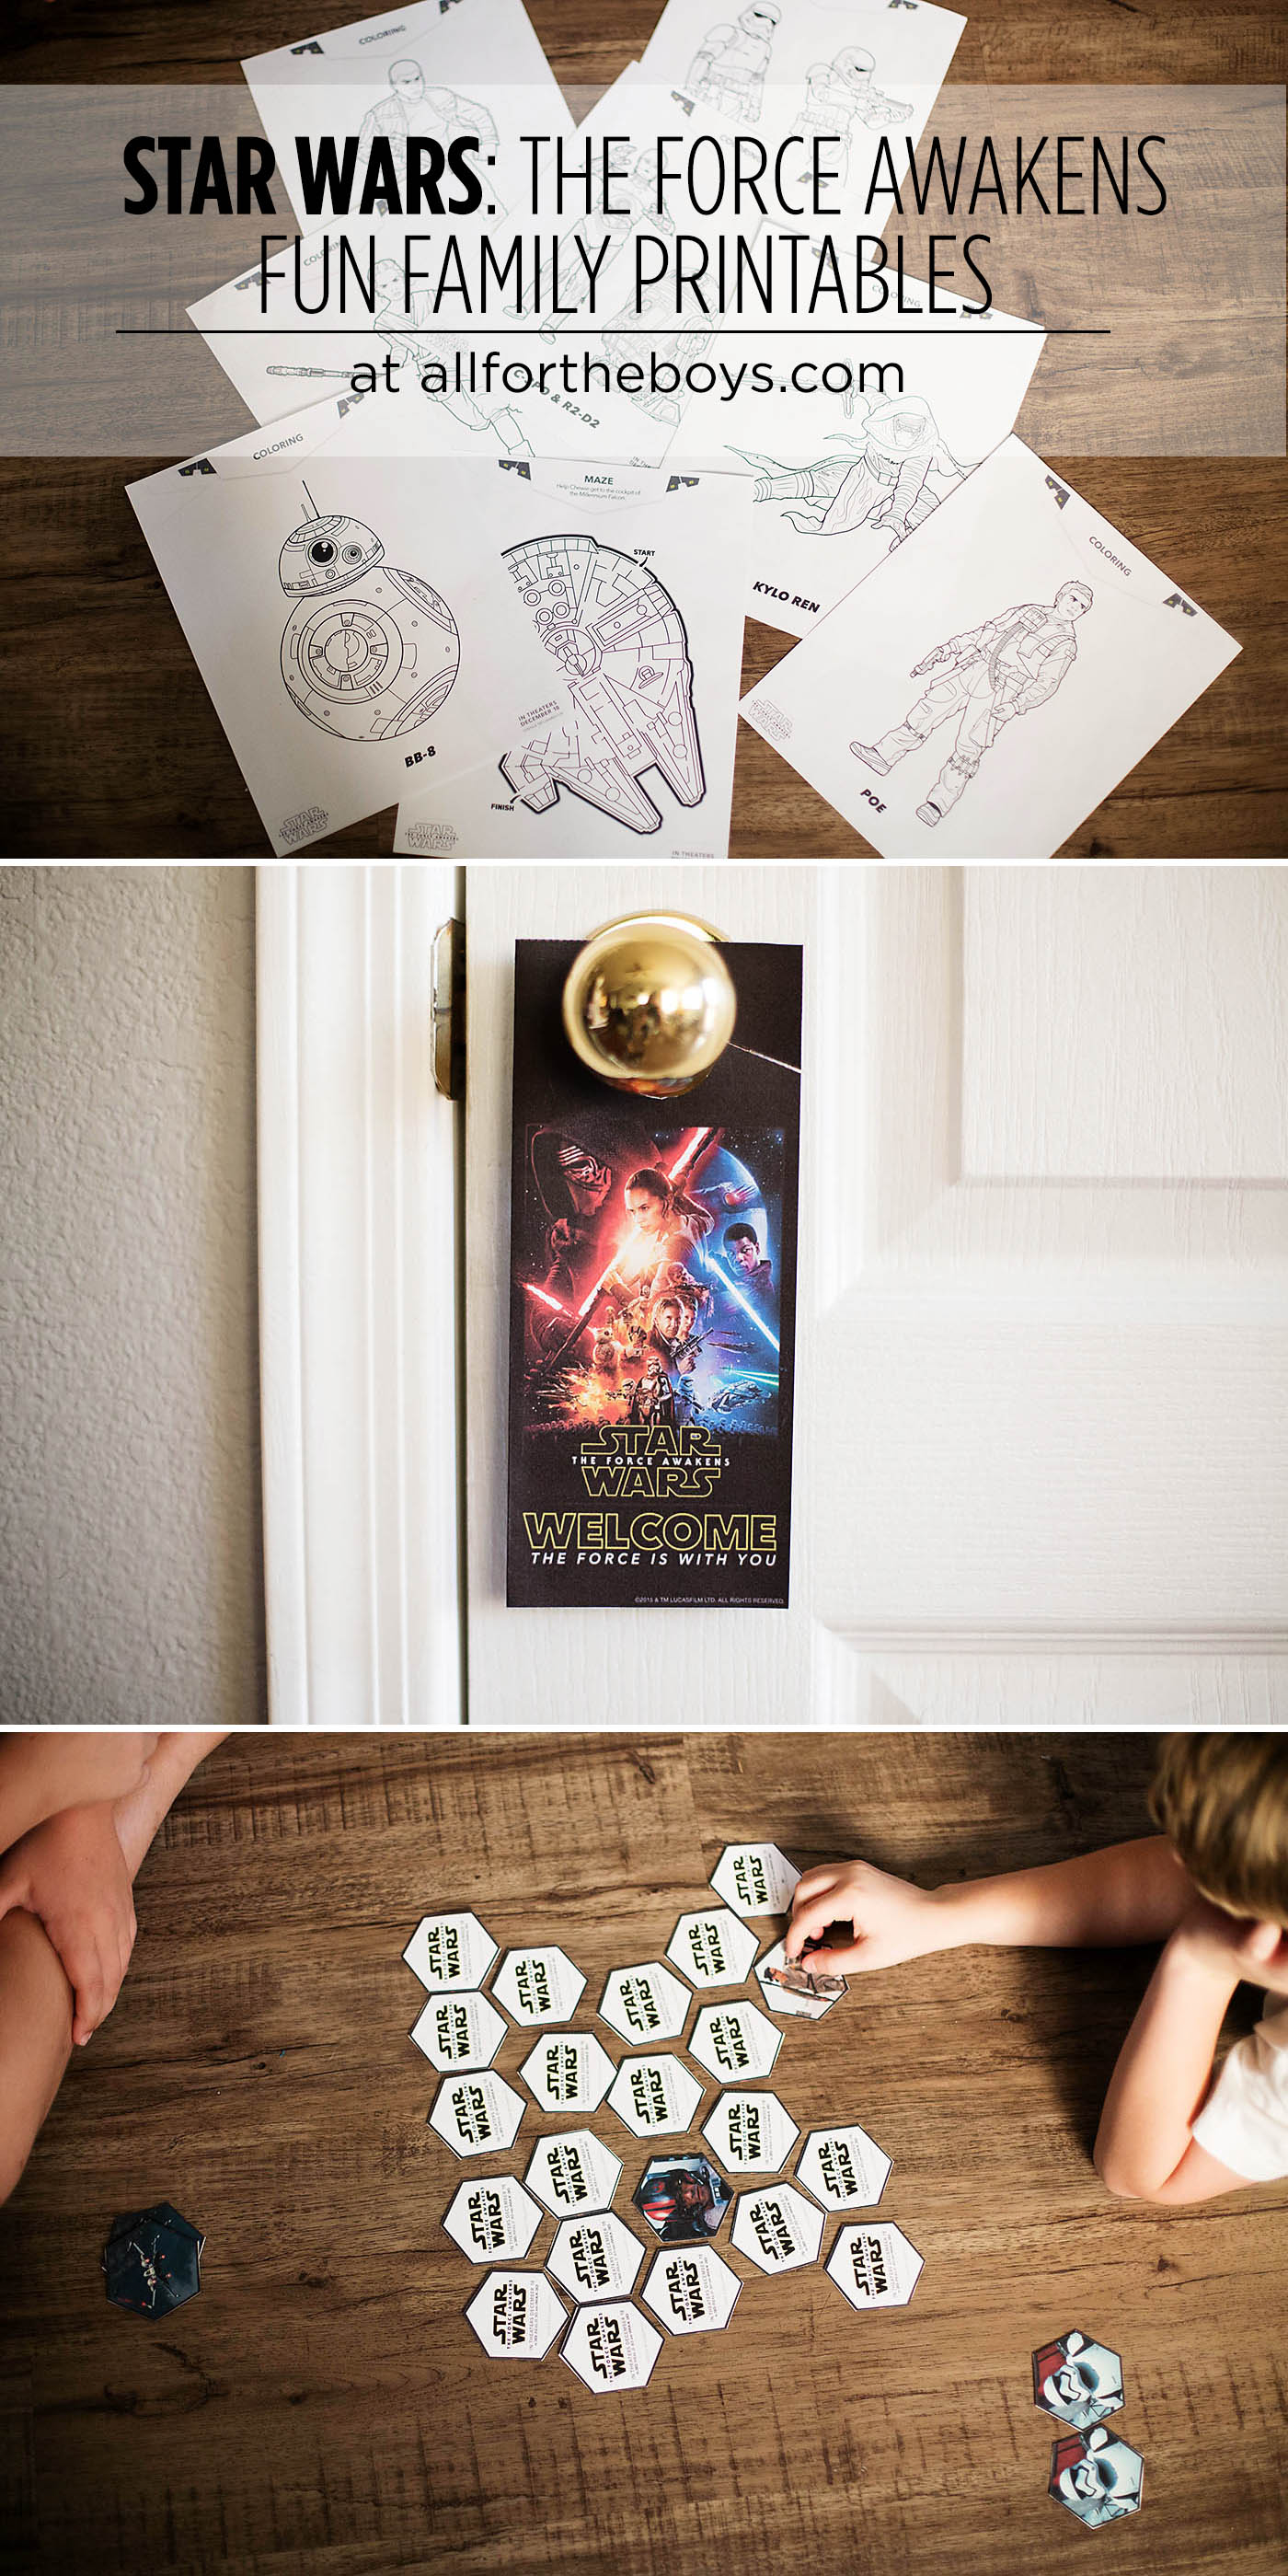 STAR WARS: THE FORCE AWAKENS fun family printables - includes coloring pages, a maze, matching game, bookmark and door hanger!